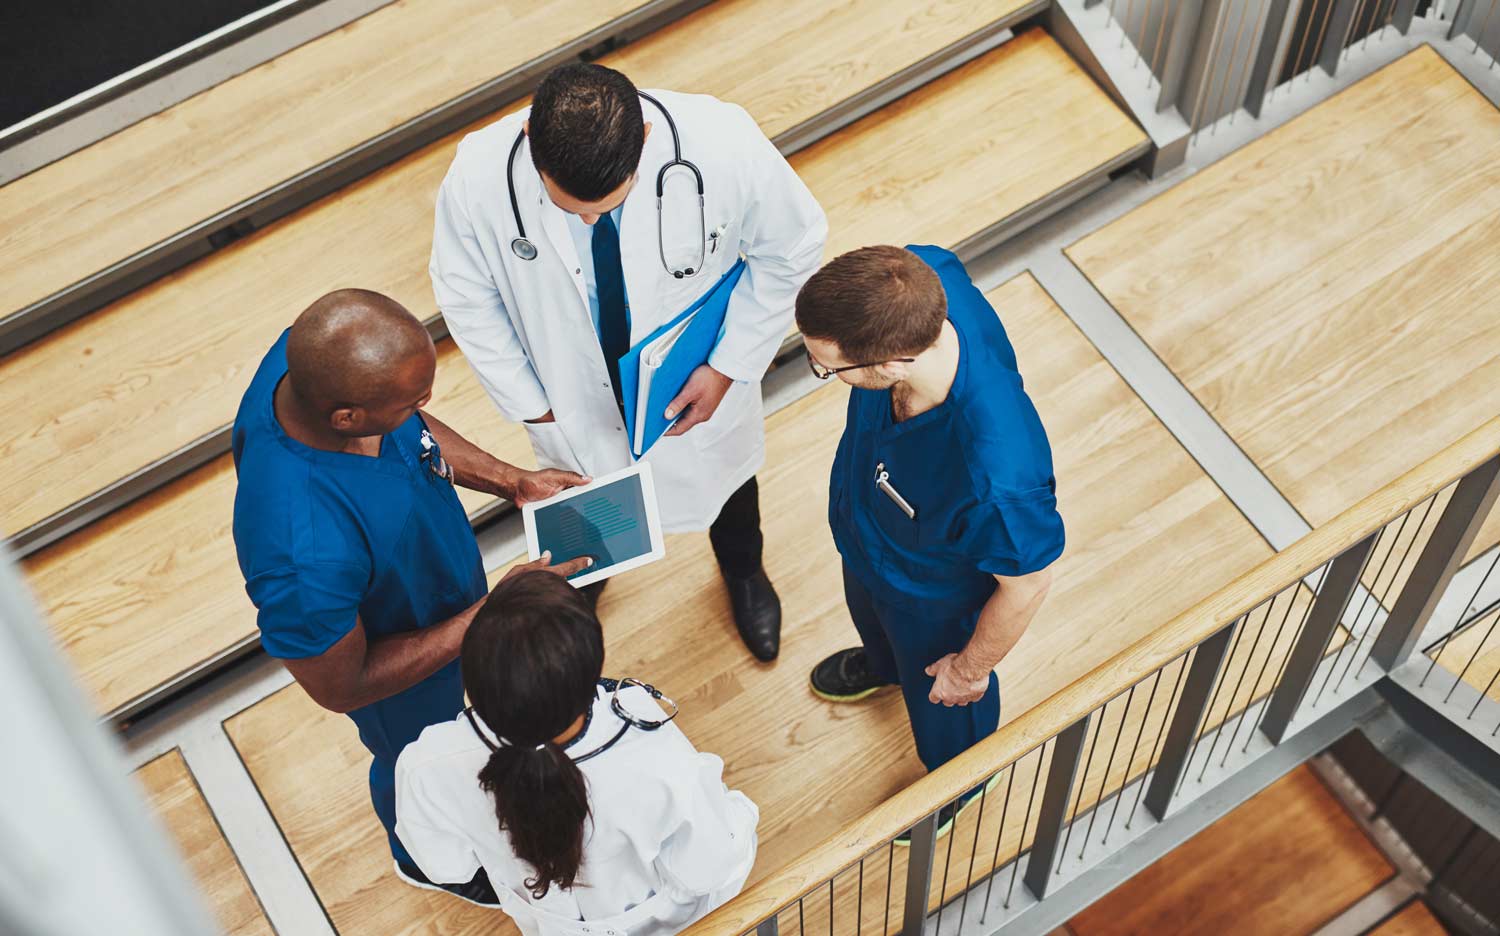 Healthcare network management is becoming part of delivering quality care